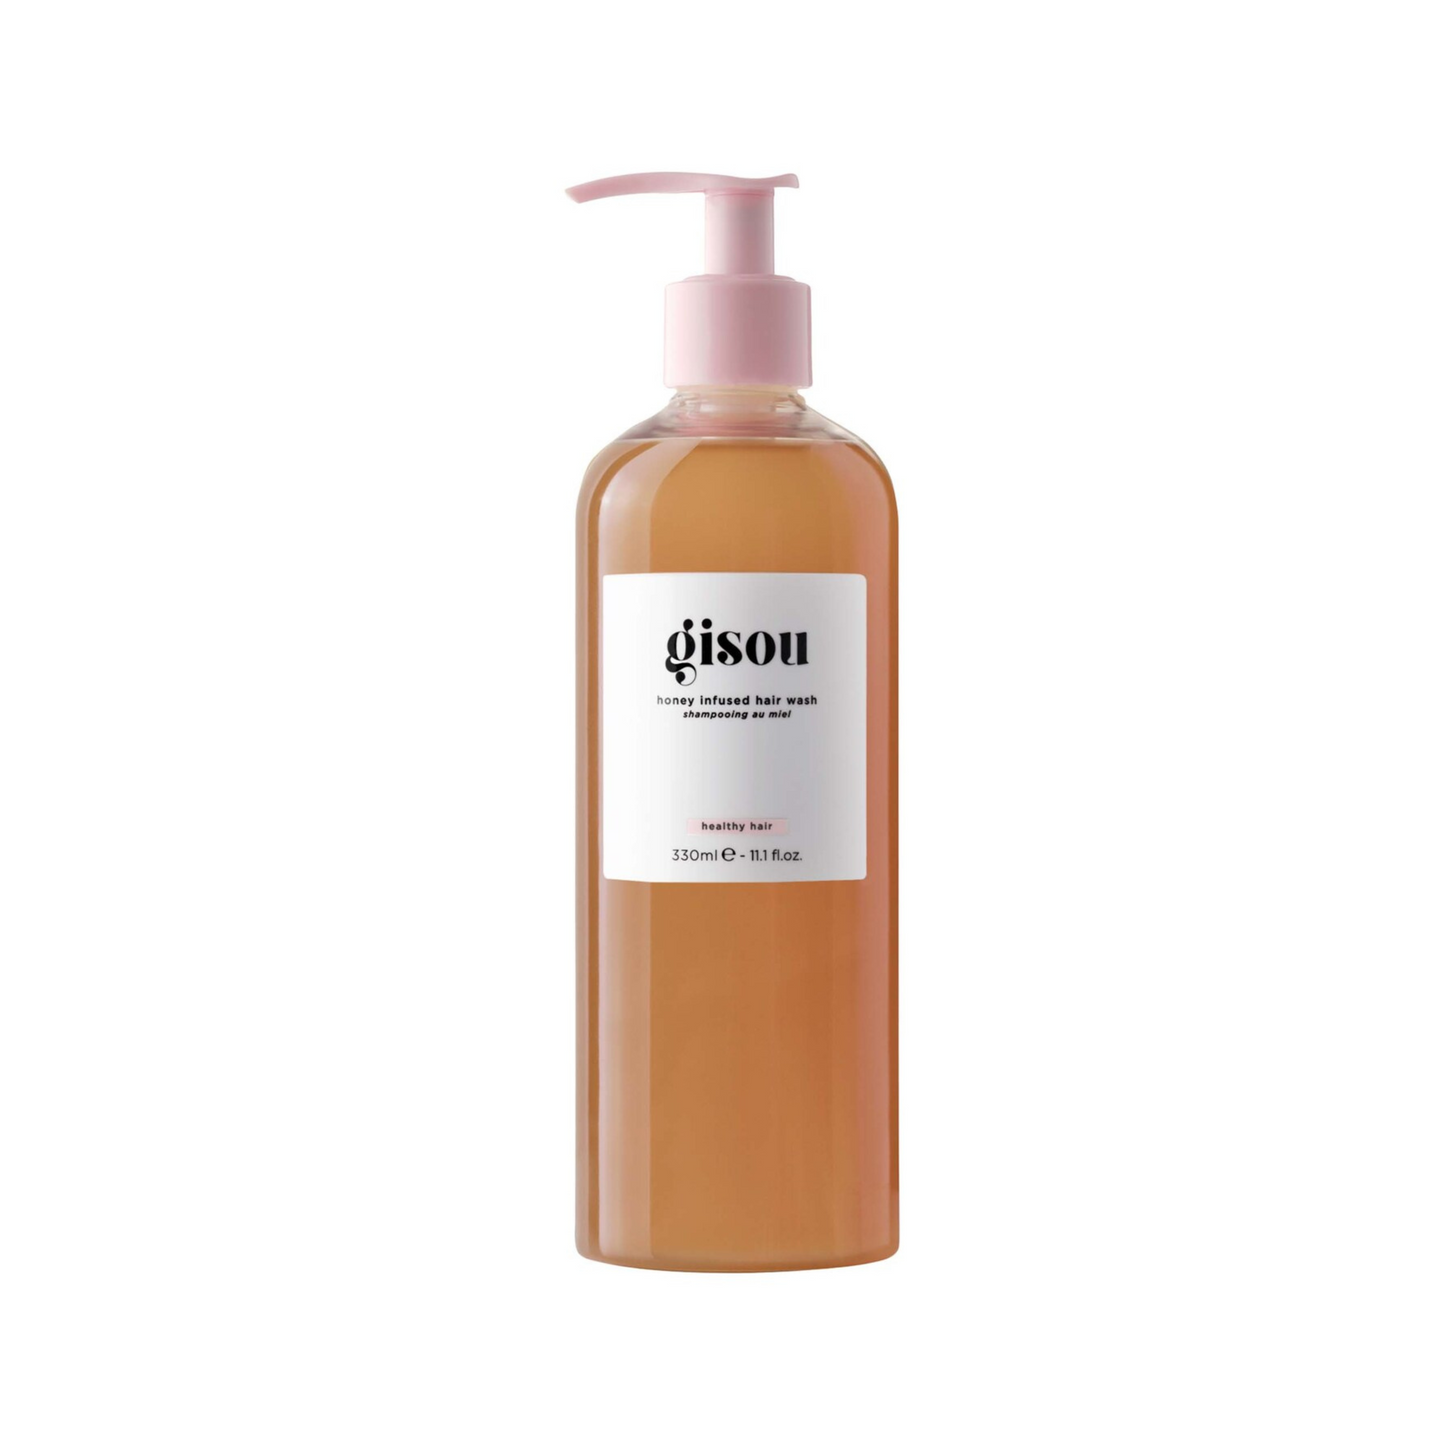 Gisou - Honey Infused Hair Wash Shampoo and Conditioner